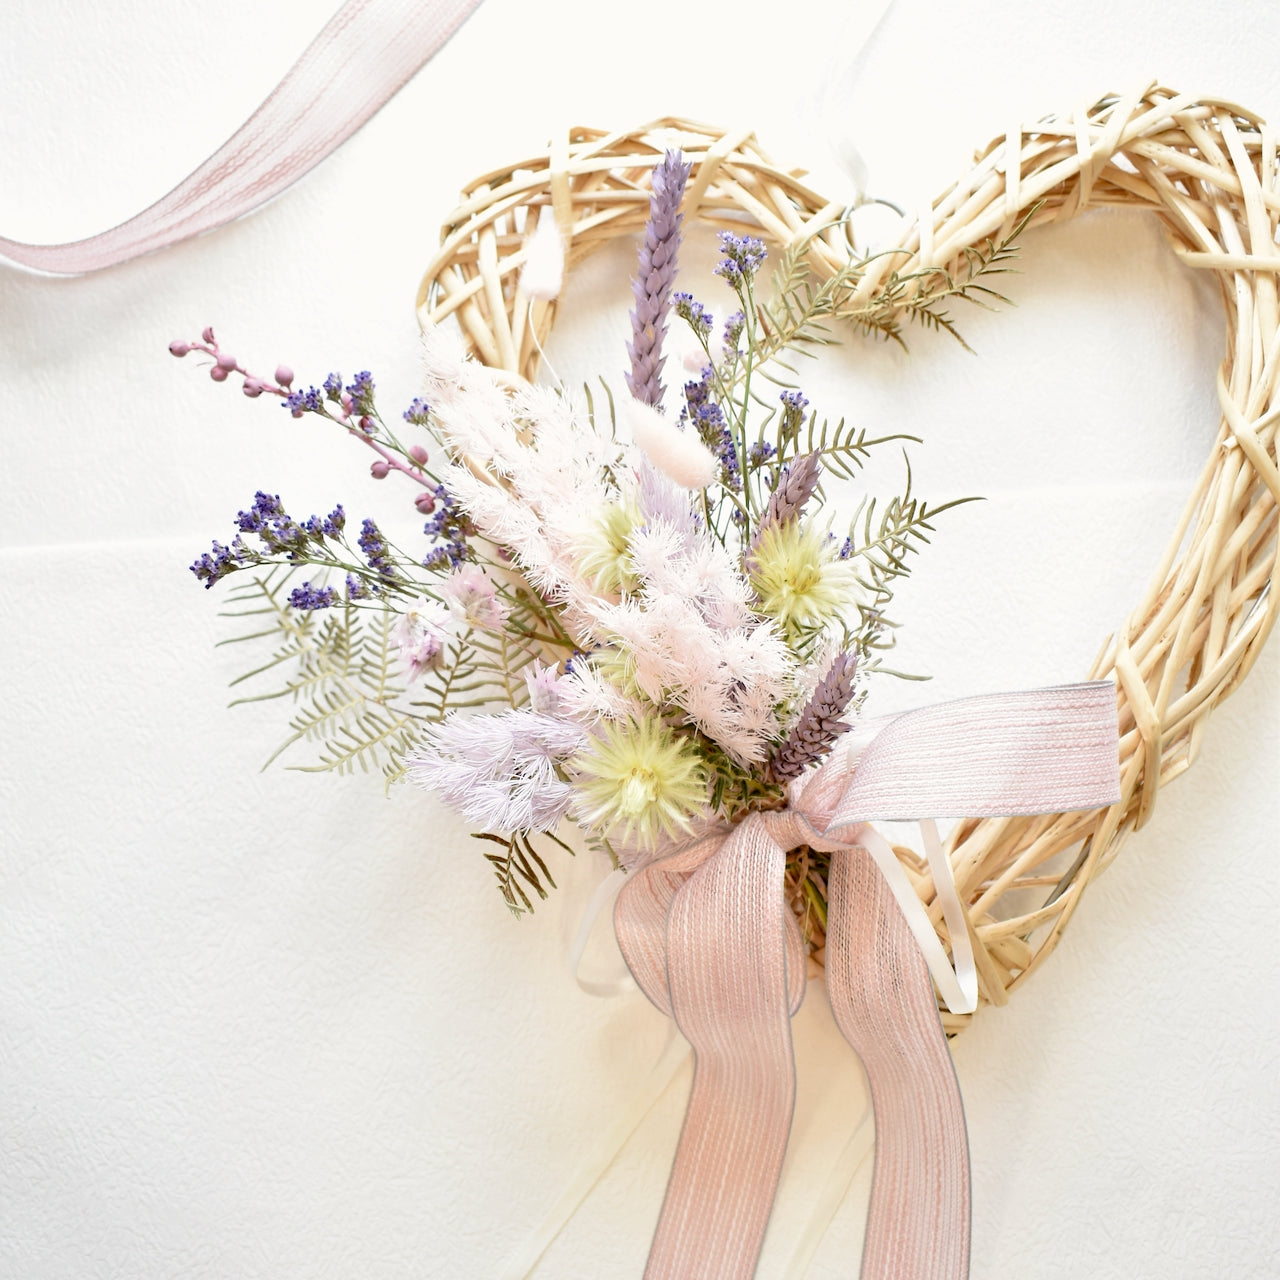 A cream wicker heart wreath on a pink backdrop, with a posy of dried flowers in white, cream, pink and purple with pale pink ribbon